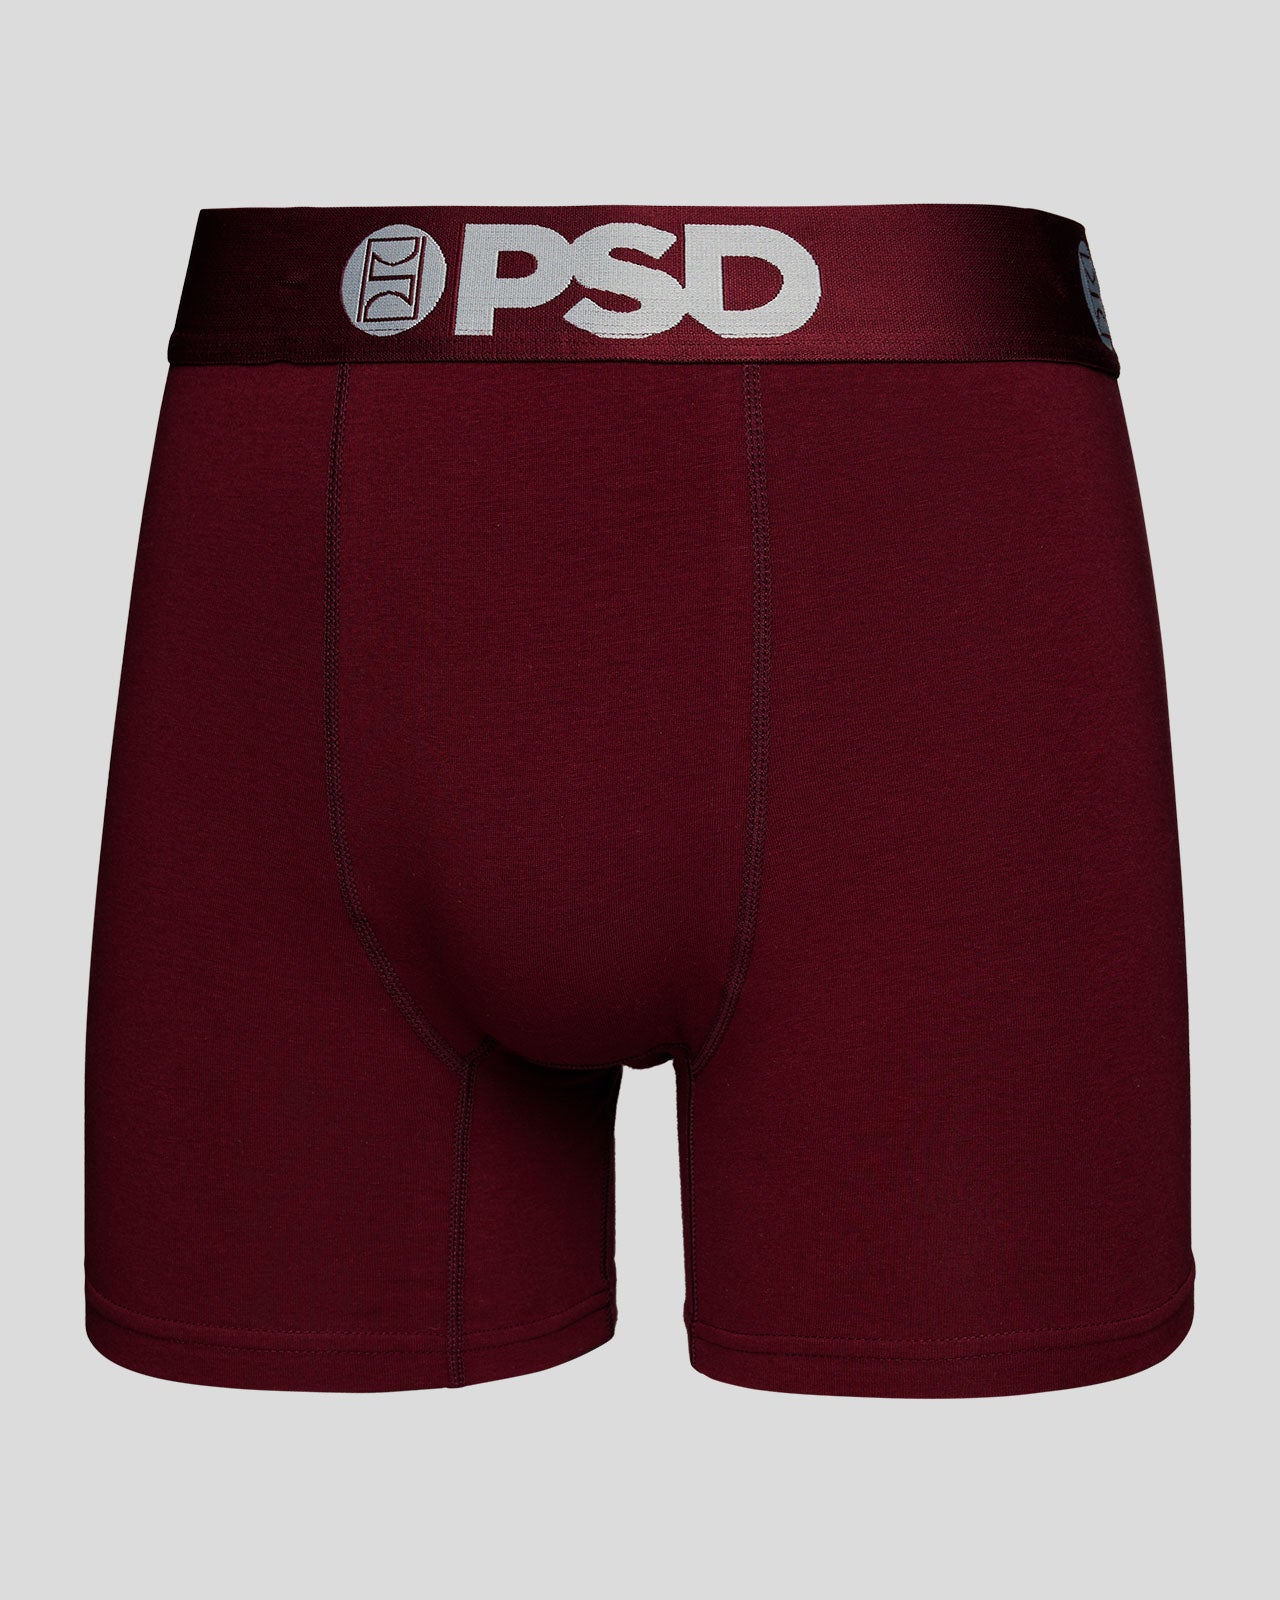 PSD 3 Pack Classic Cotton Stretch Boxer Briefs - Men's Boxers in